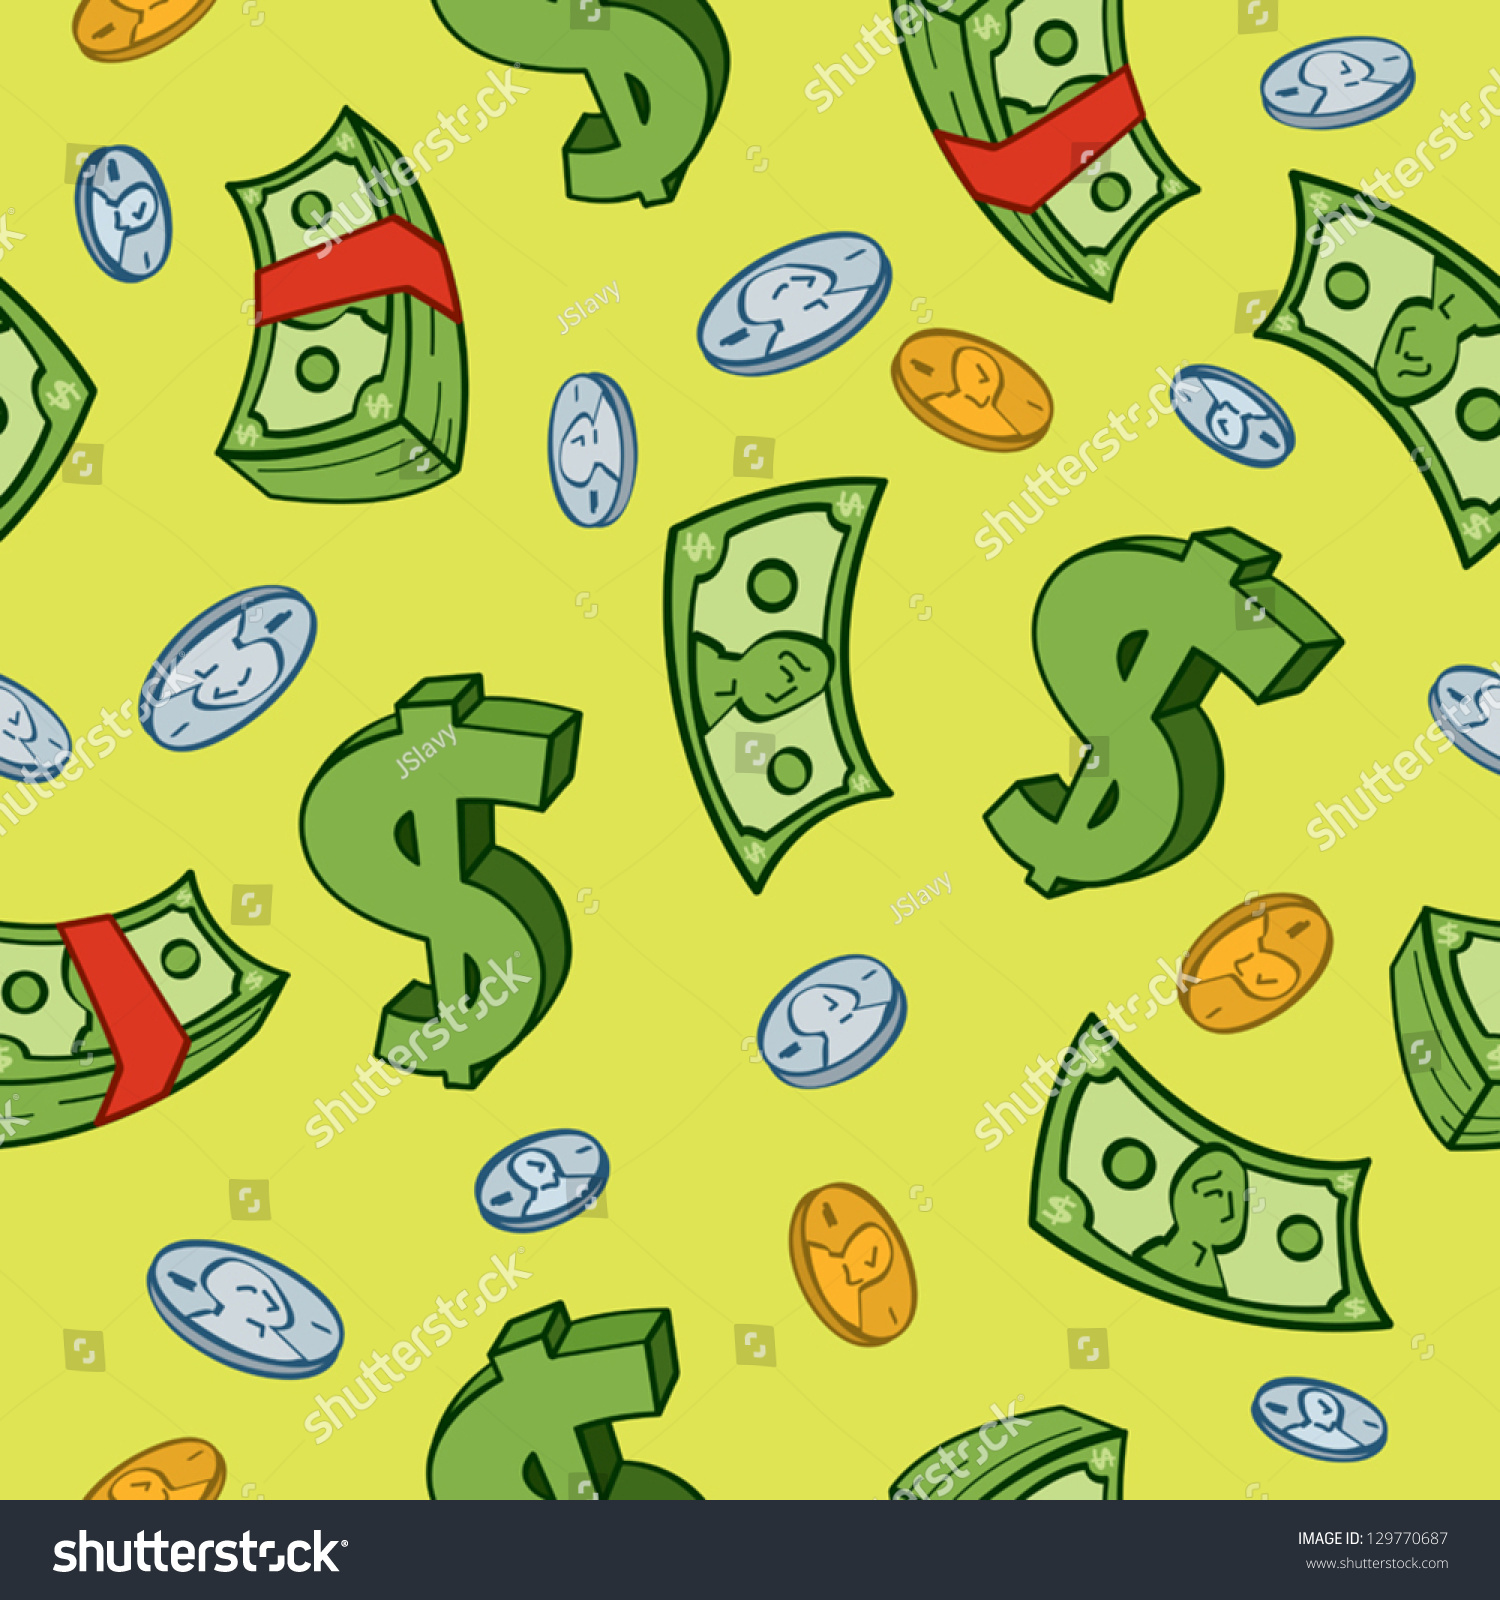 clipart flying dollar sign - photo #42